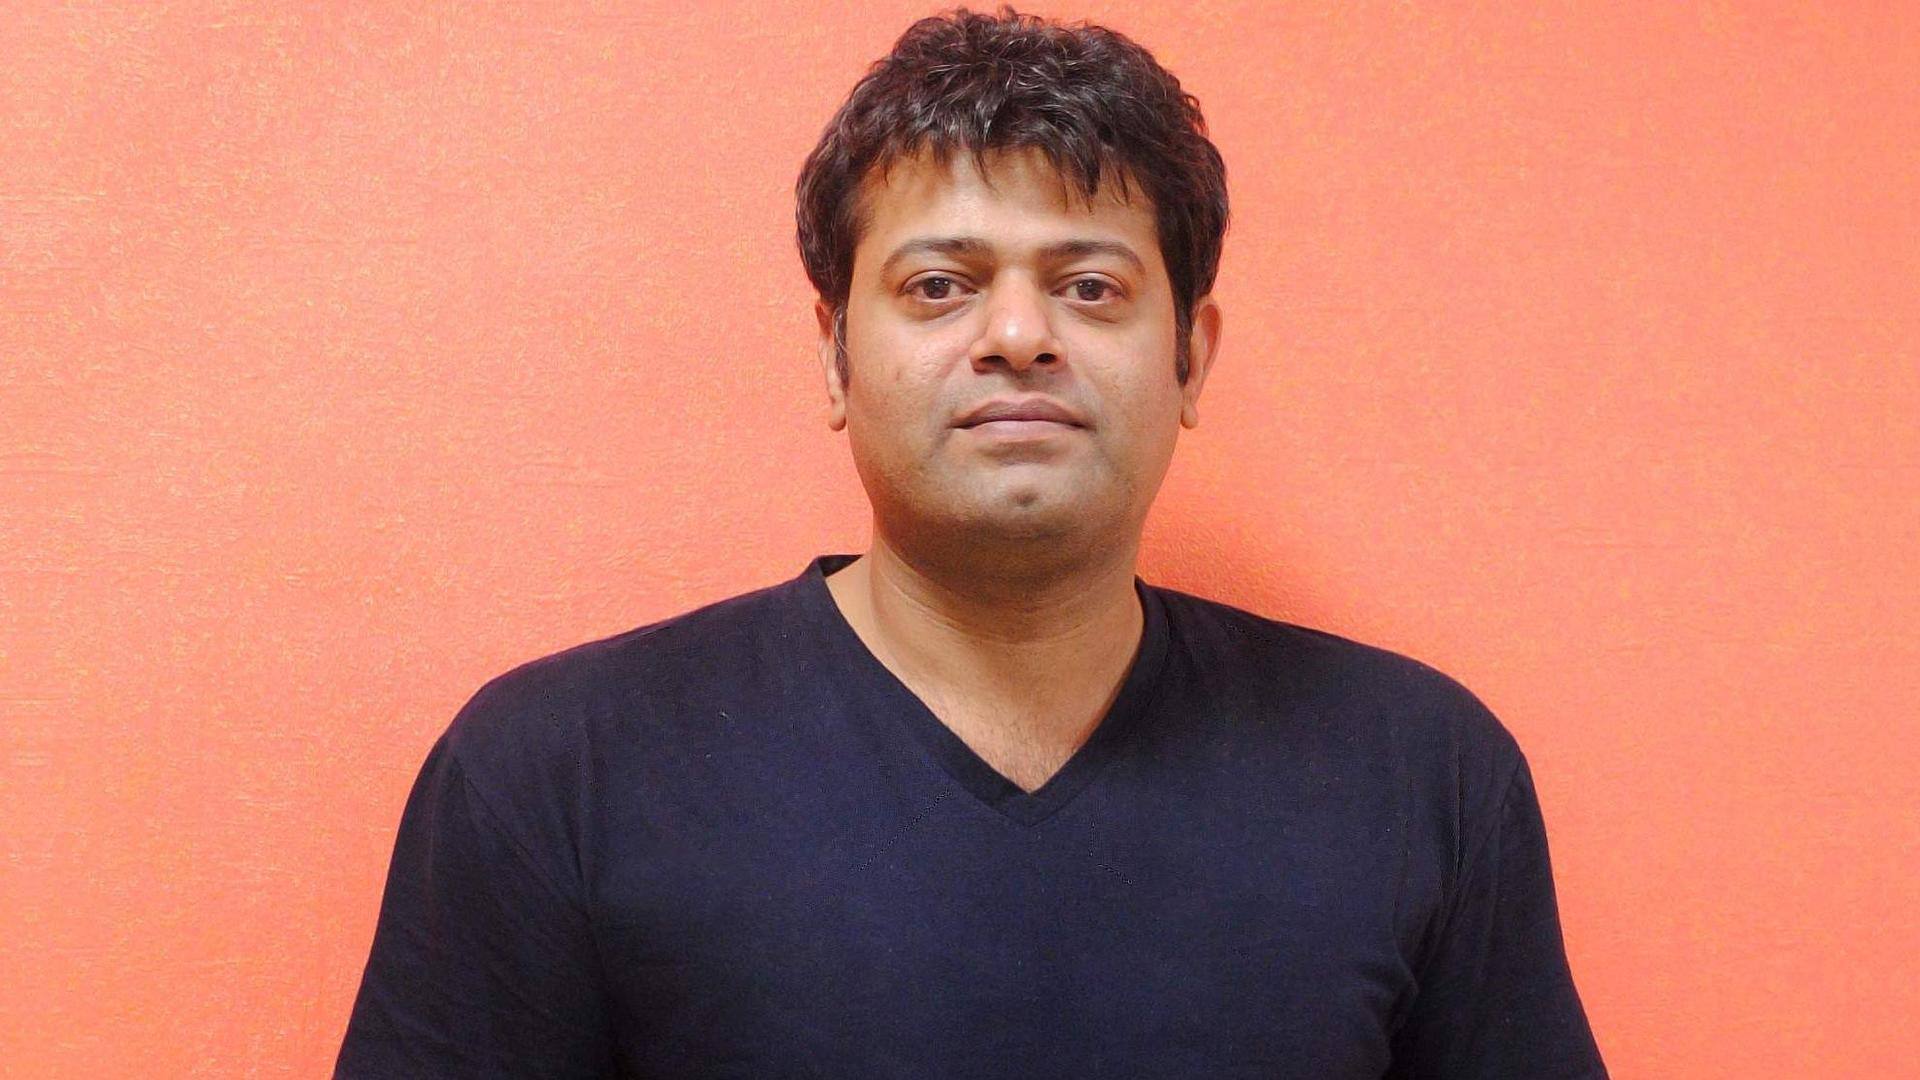 Webchutney co-founder Sidharth Rao no more, dies at 43